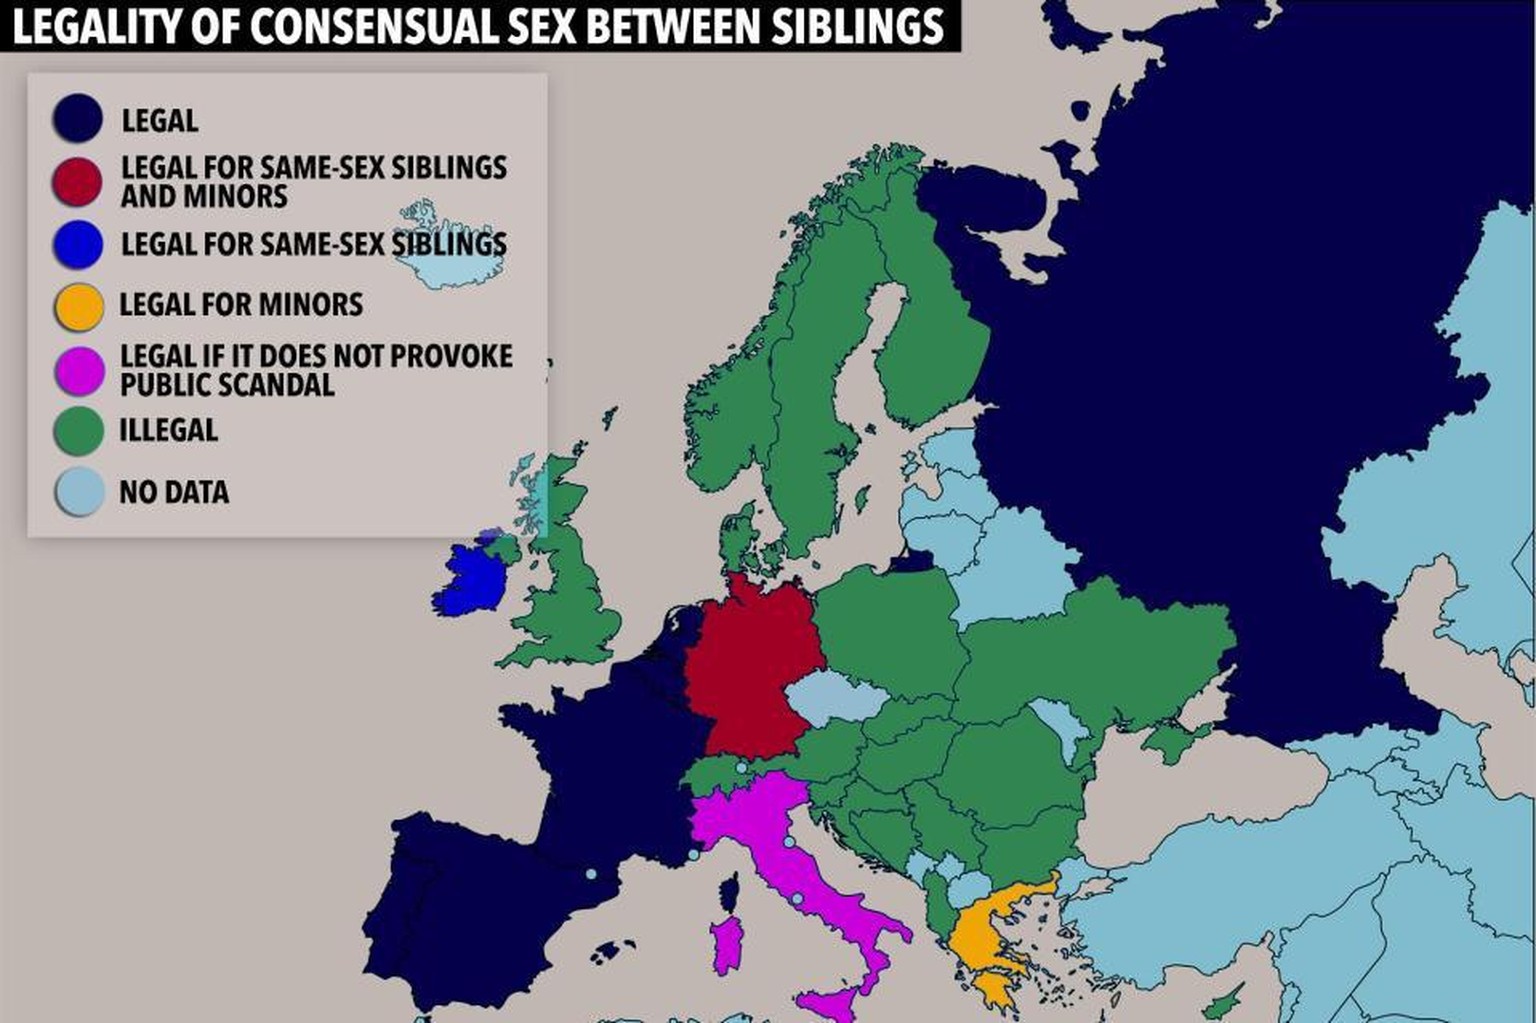 Legality of consensual sex between siblings